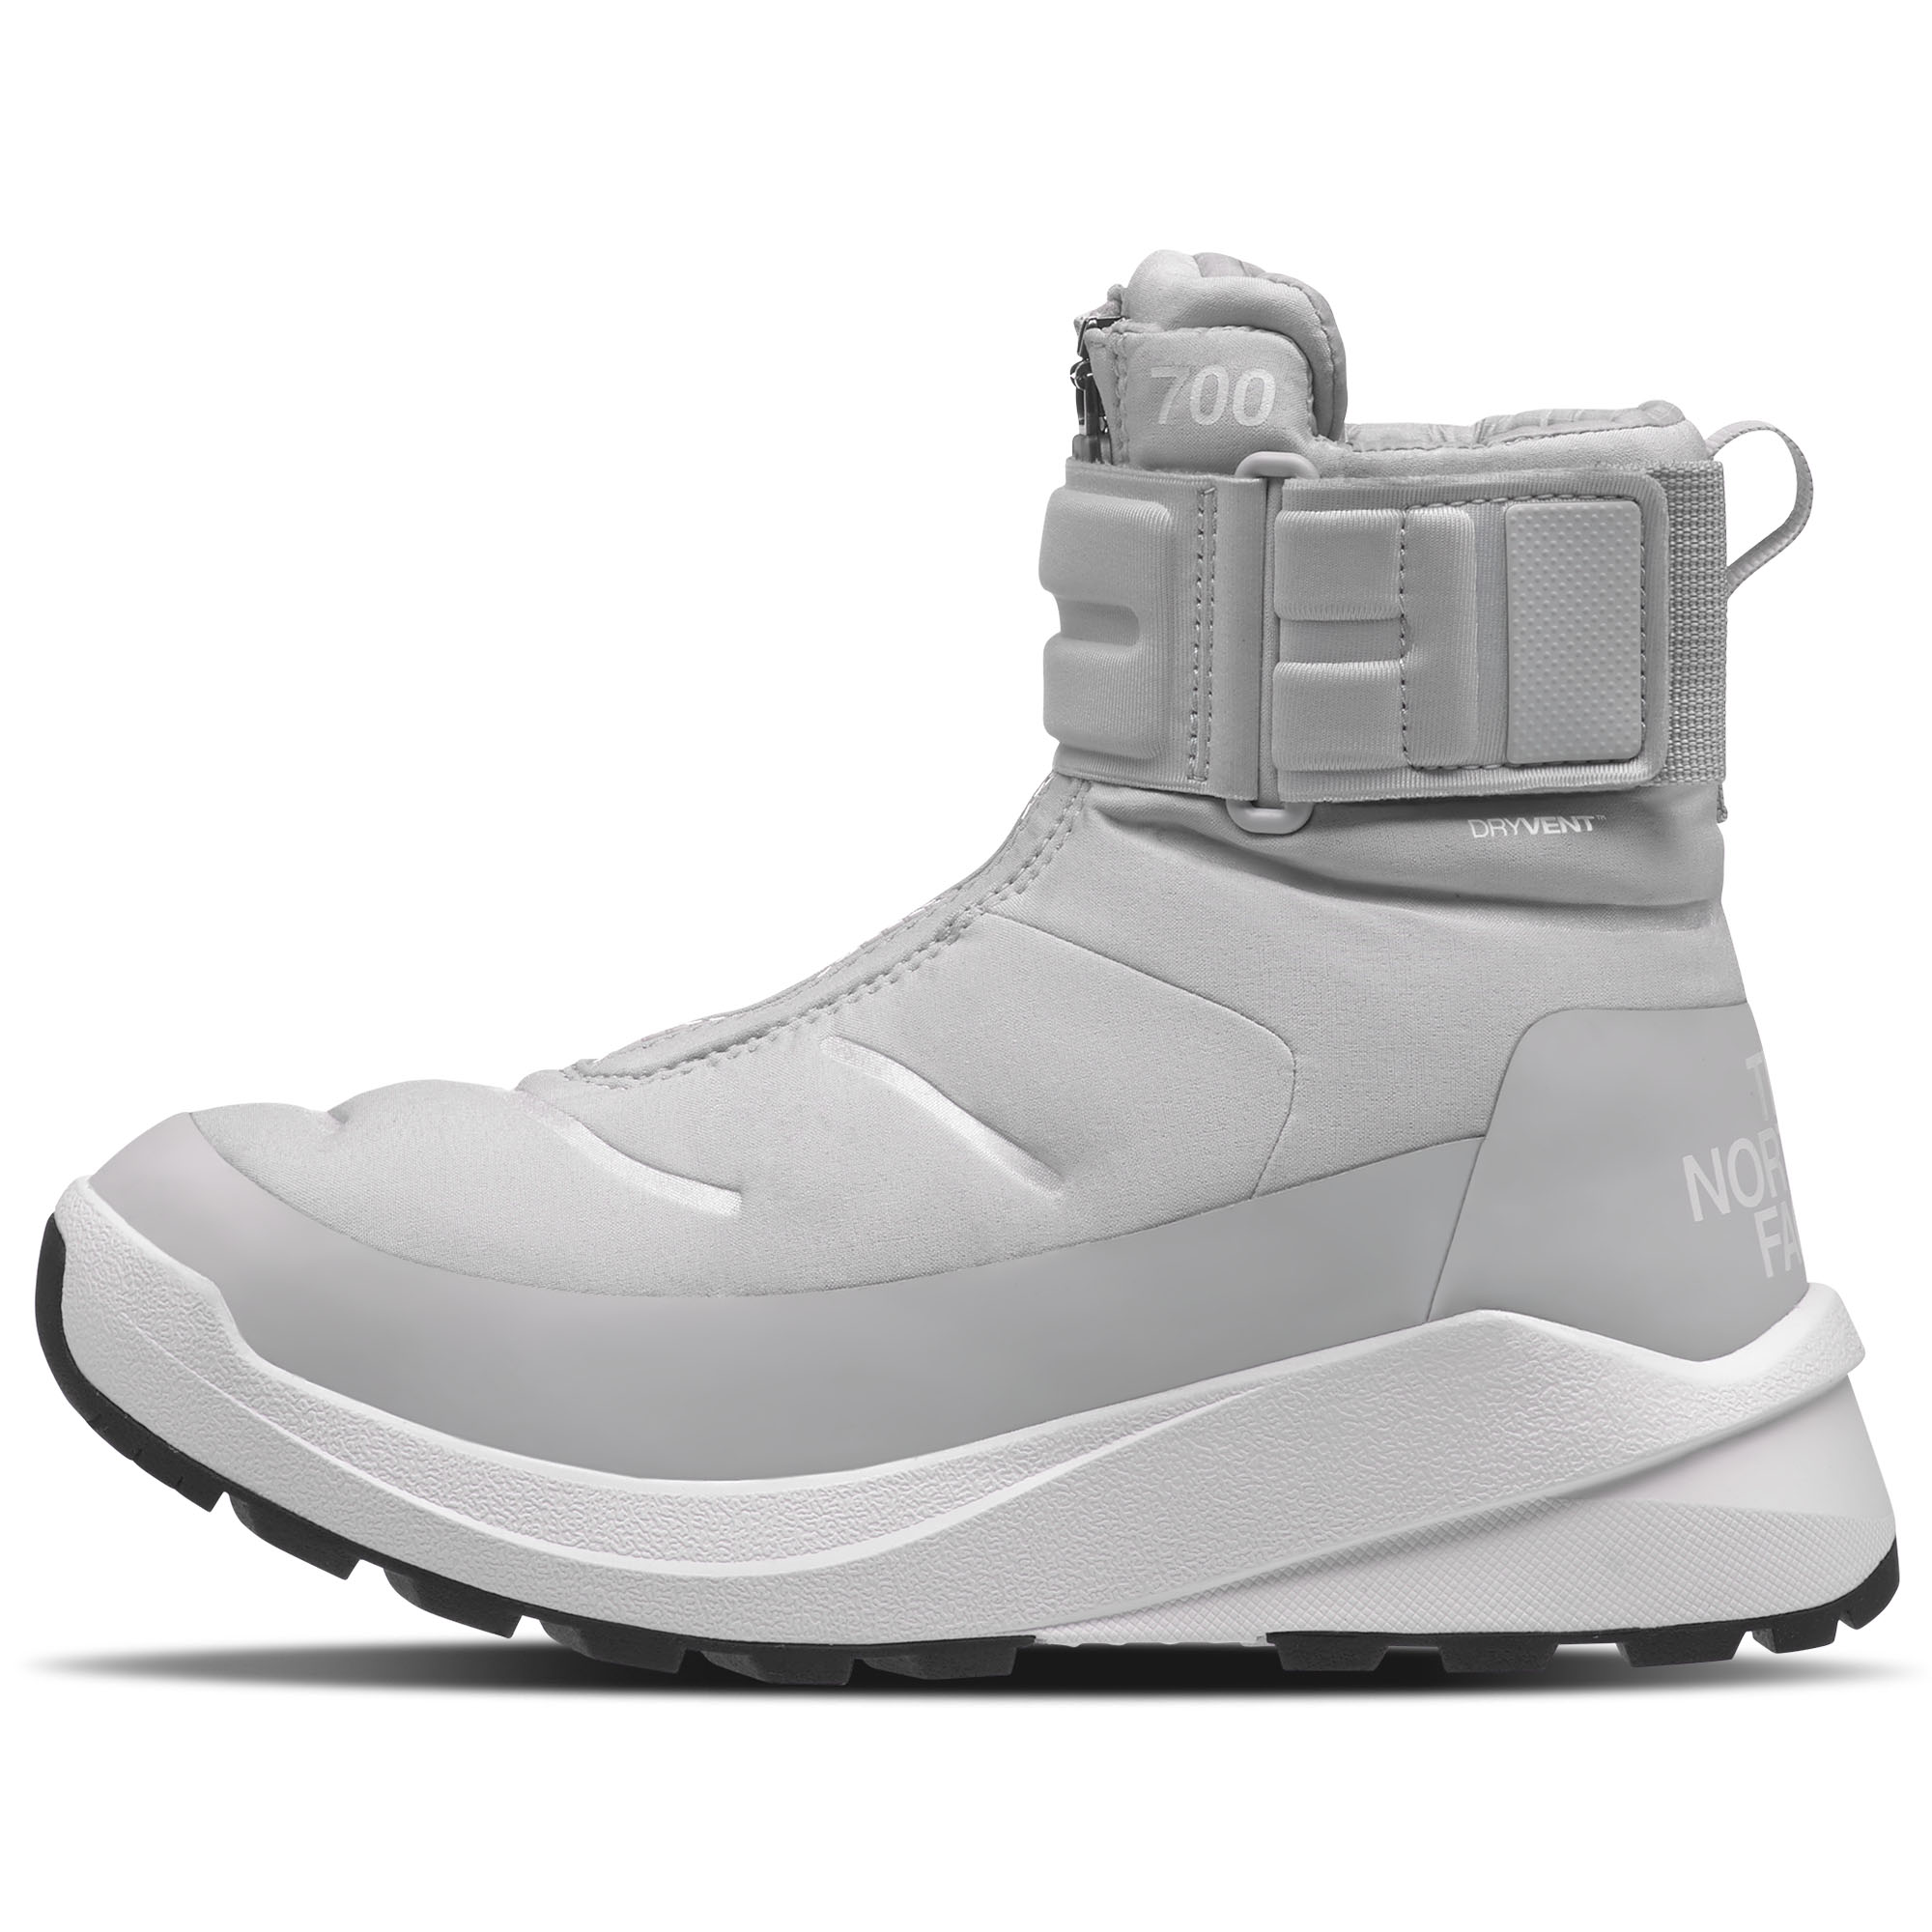 The North Face Womens Nuptse II Strap Waterproof Winter Boots